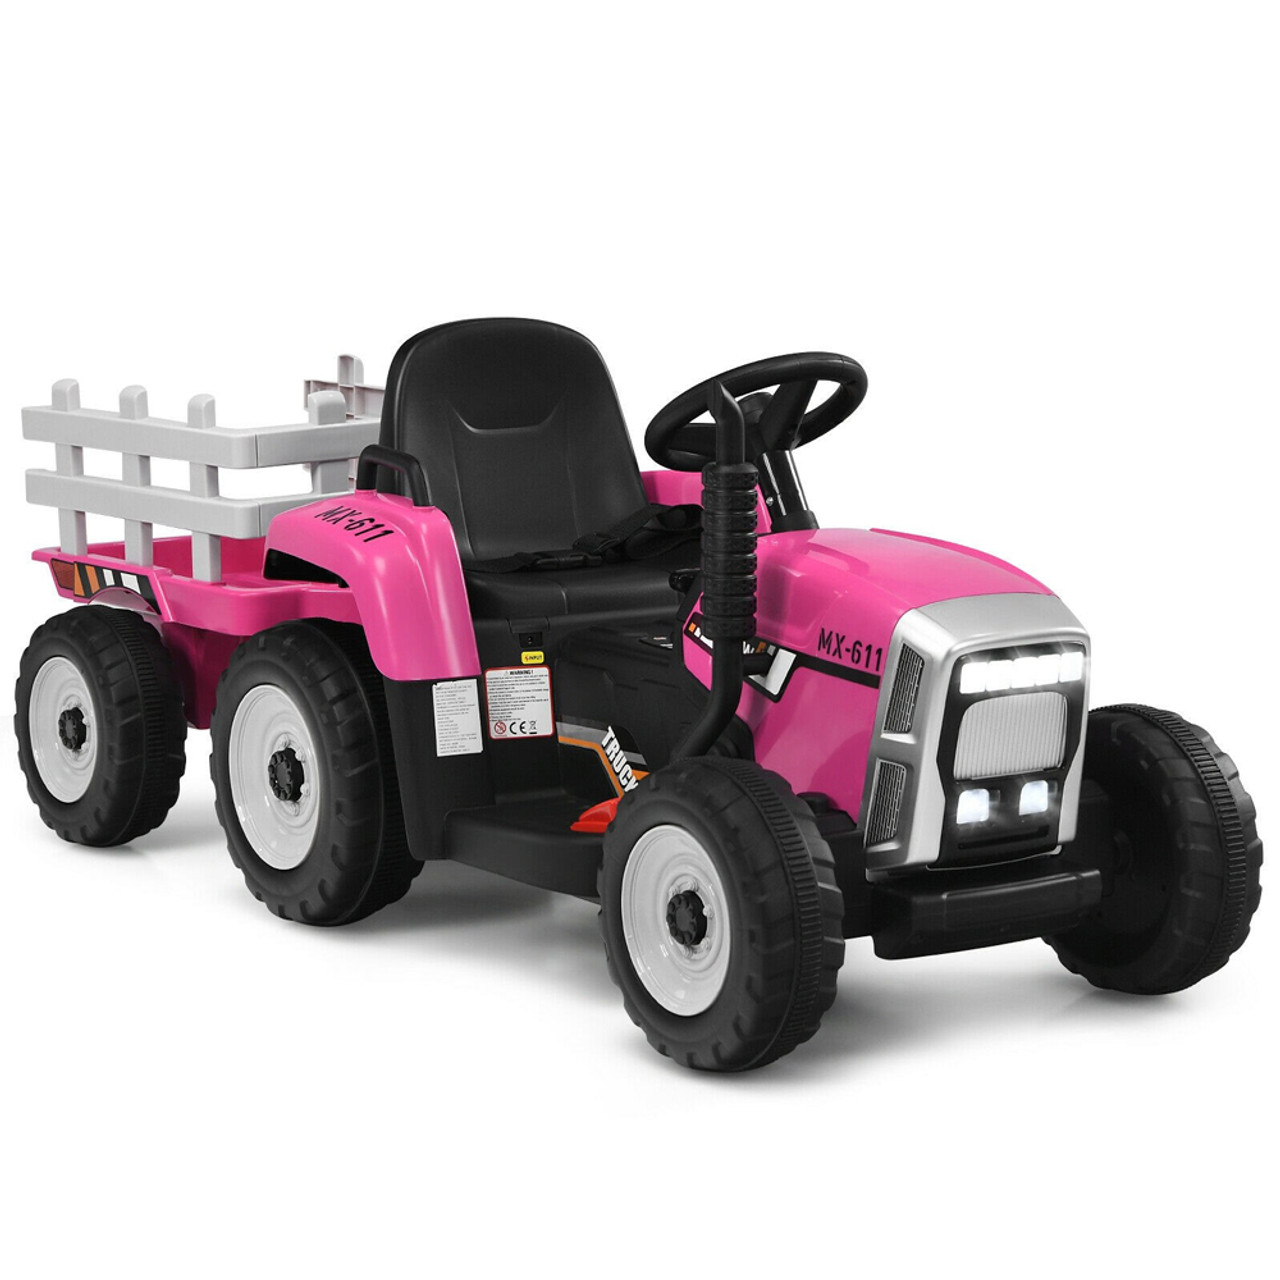 Kids' 12V Ride-on Tractor with Trailer and Parent Remote Control product image